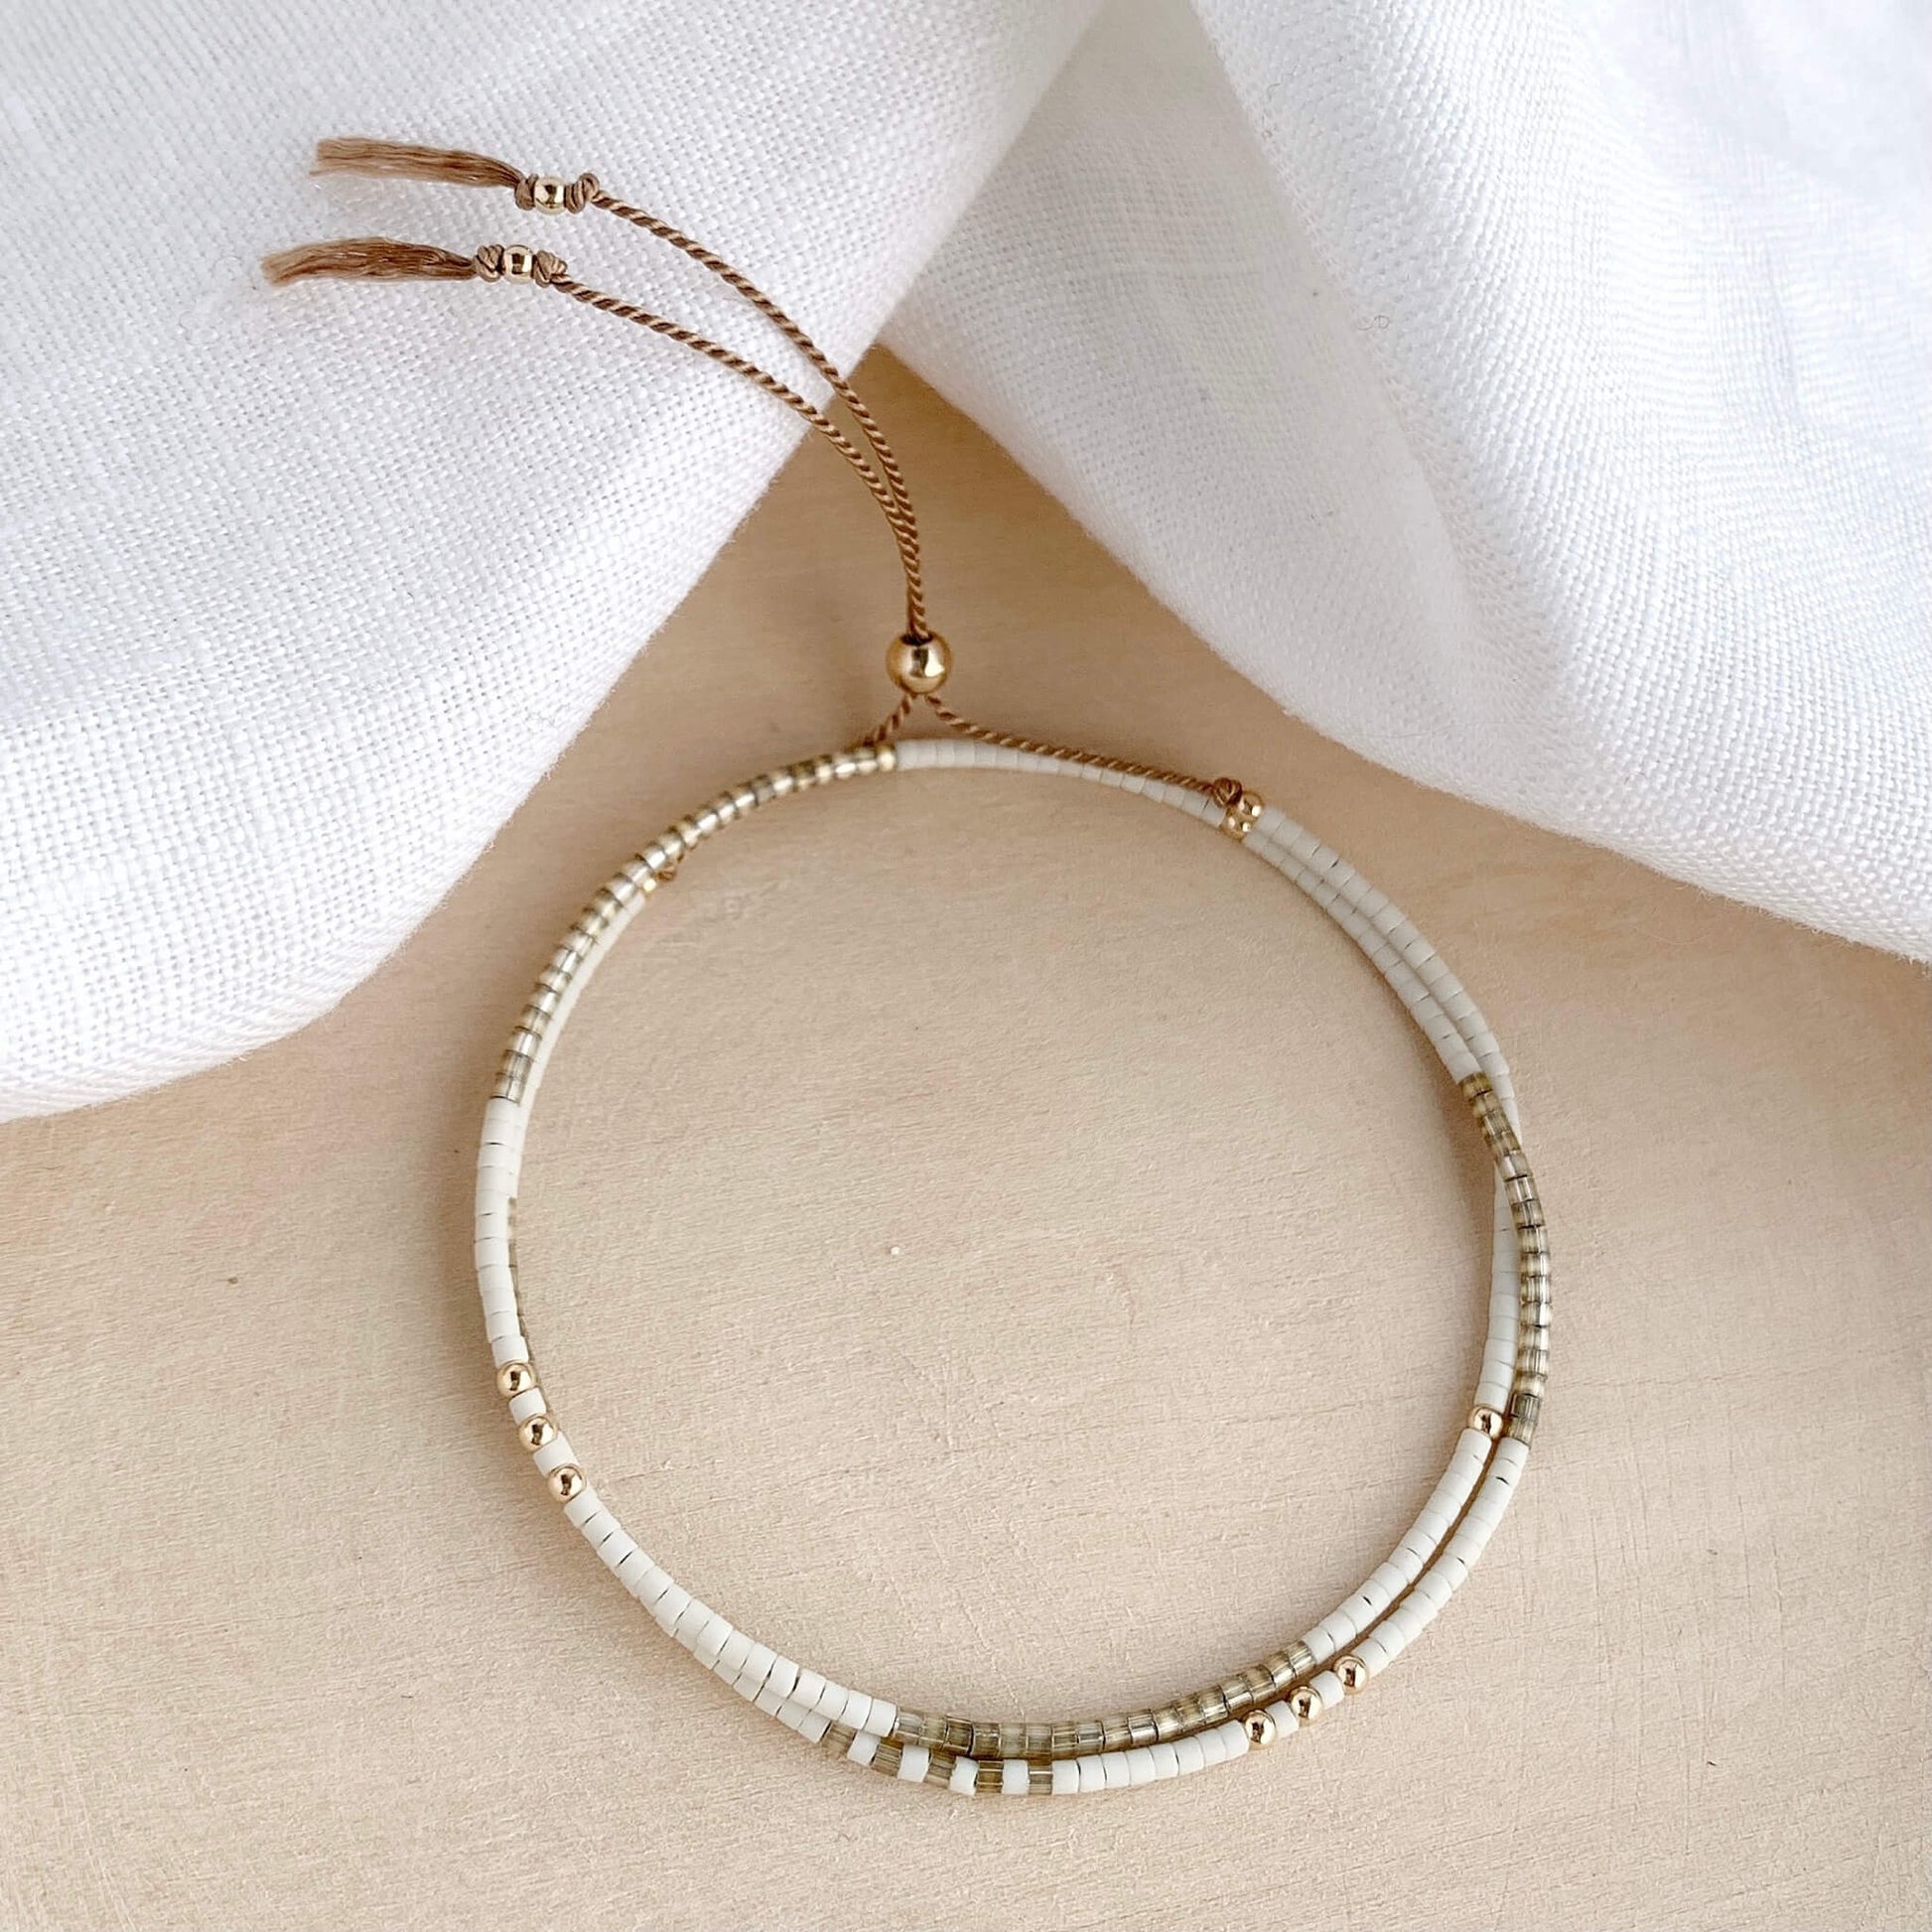 dainty beaded silk bracelet in beige and white with a gold clasp